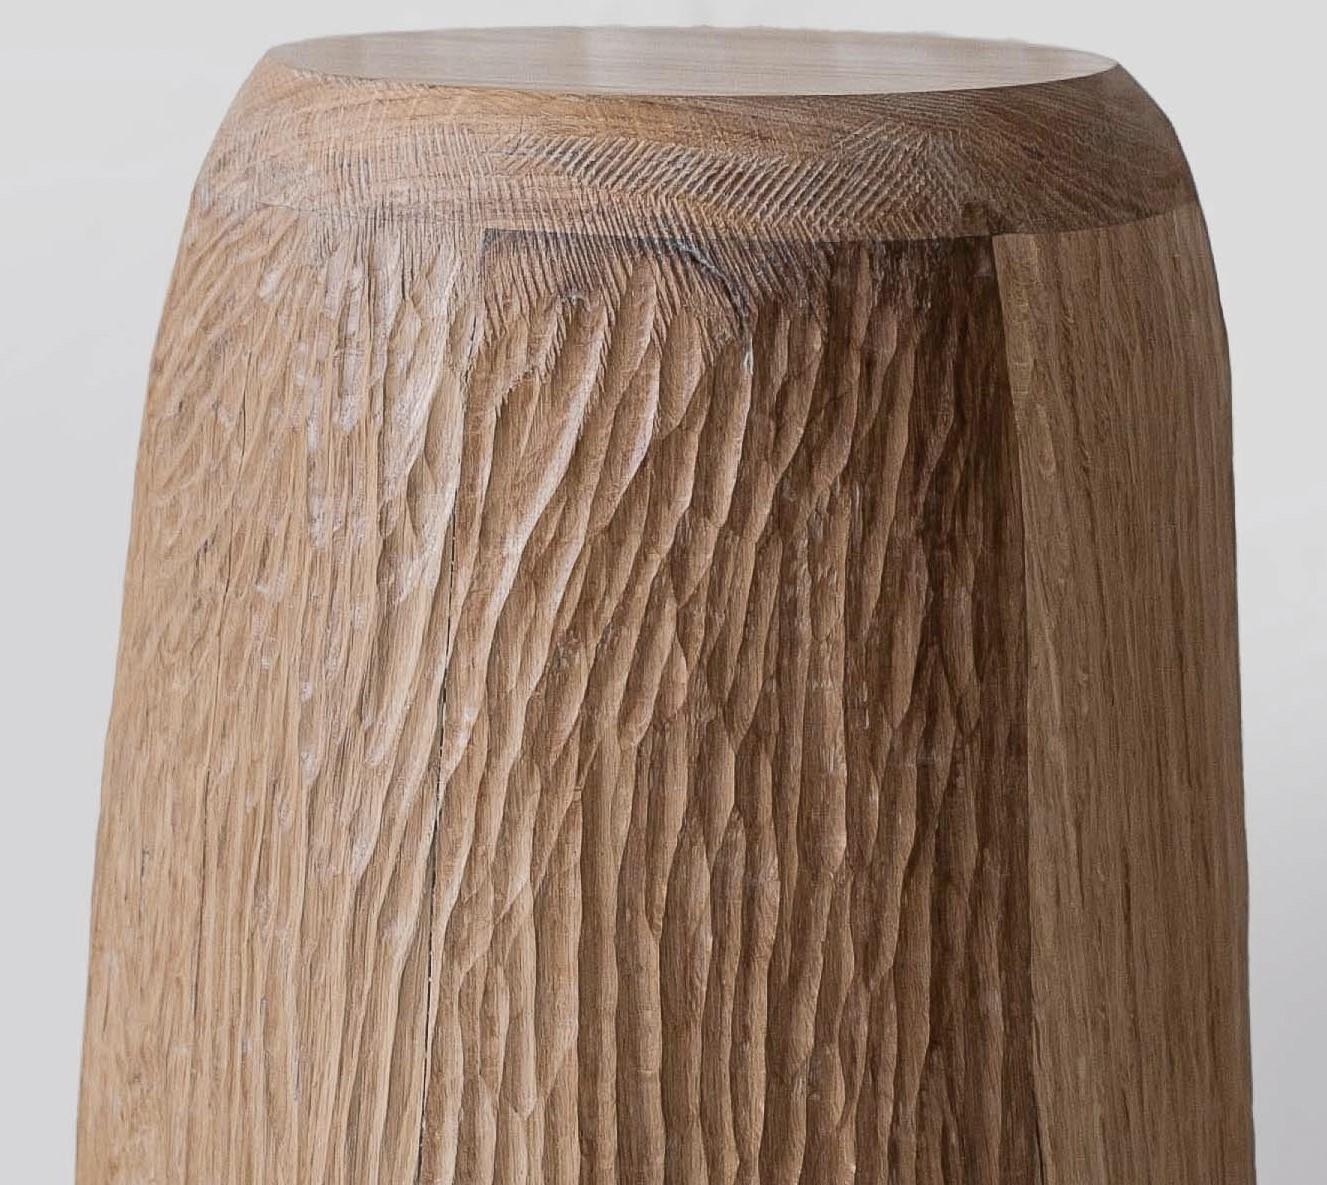 Intuitive Archaisme Massive Stool by Cedric Breisacher In New Condition For Sale In Geneve, CH